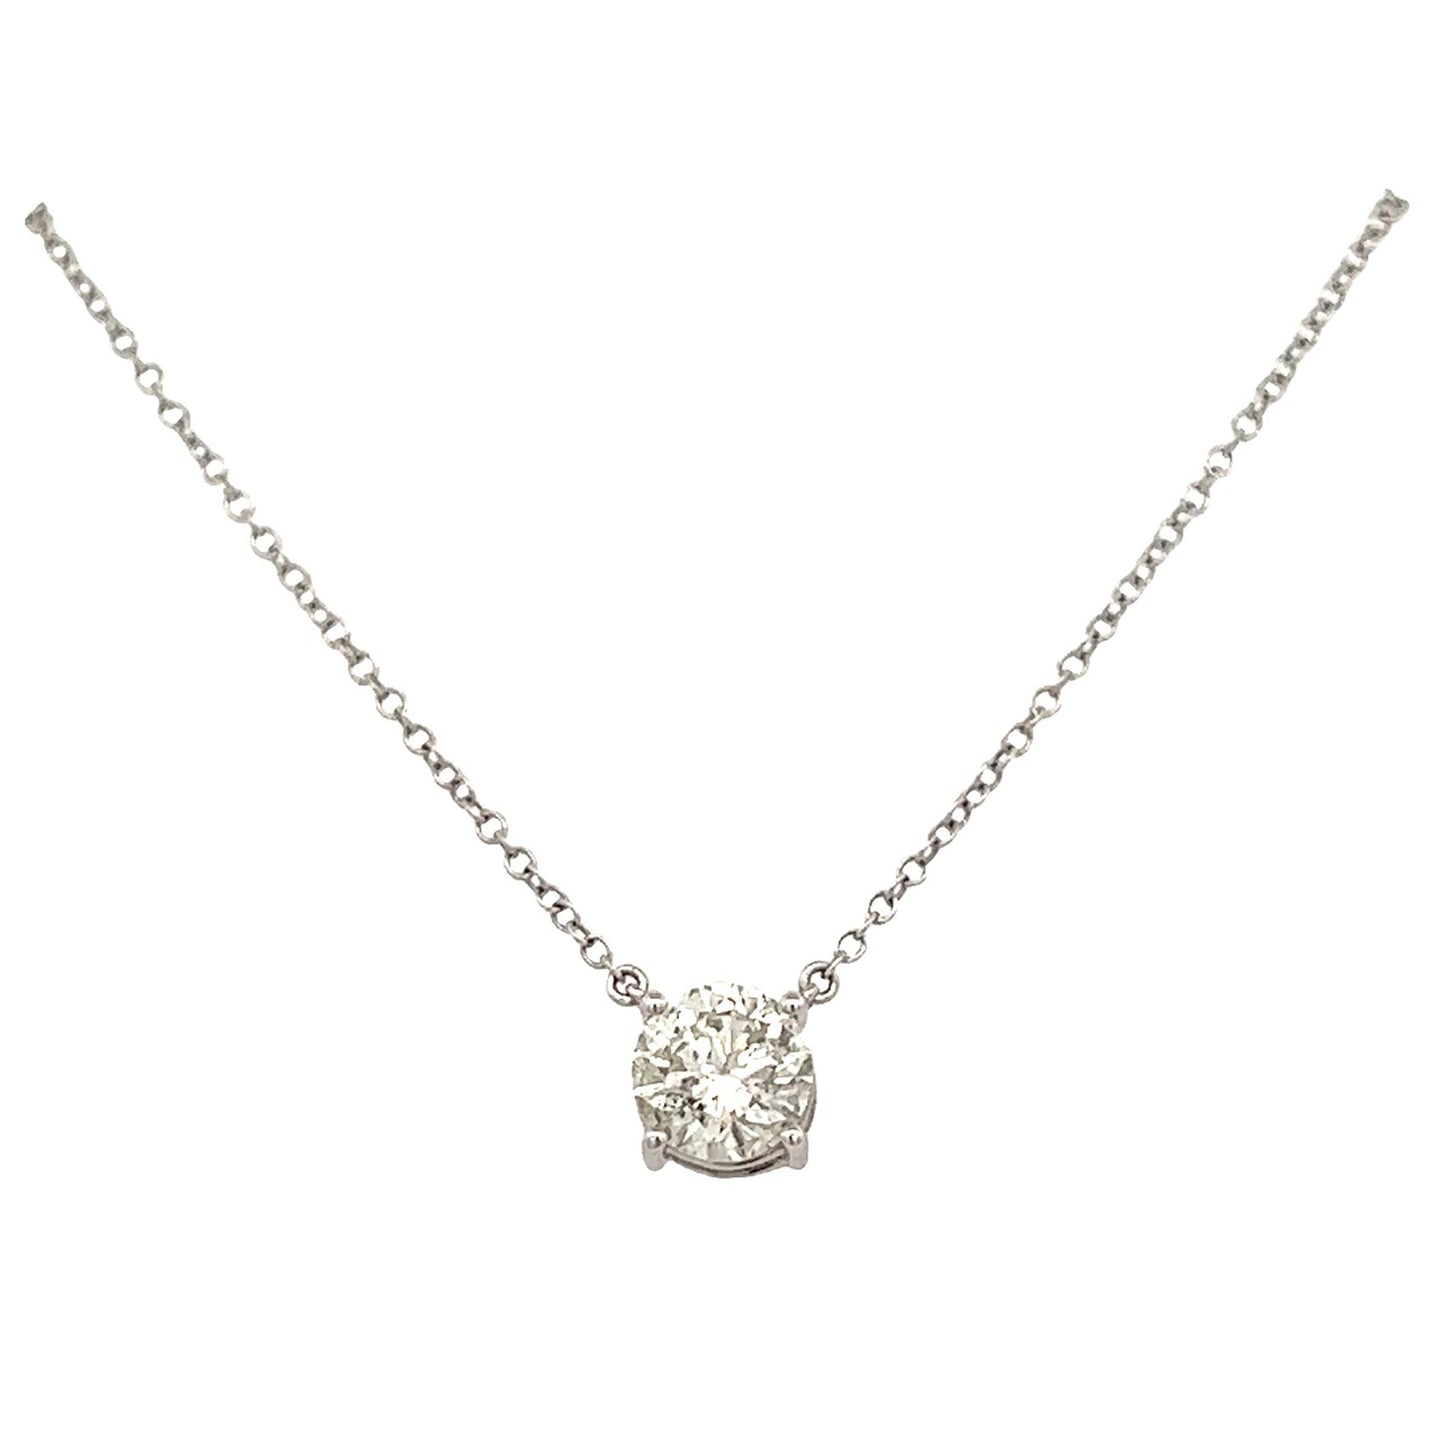 14K WG 1.26 RD TCW SOLITAIRE necklace